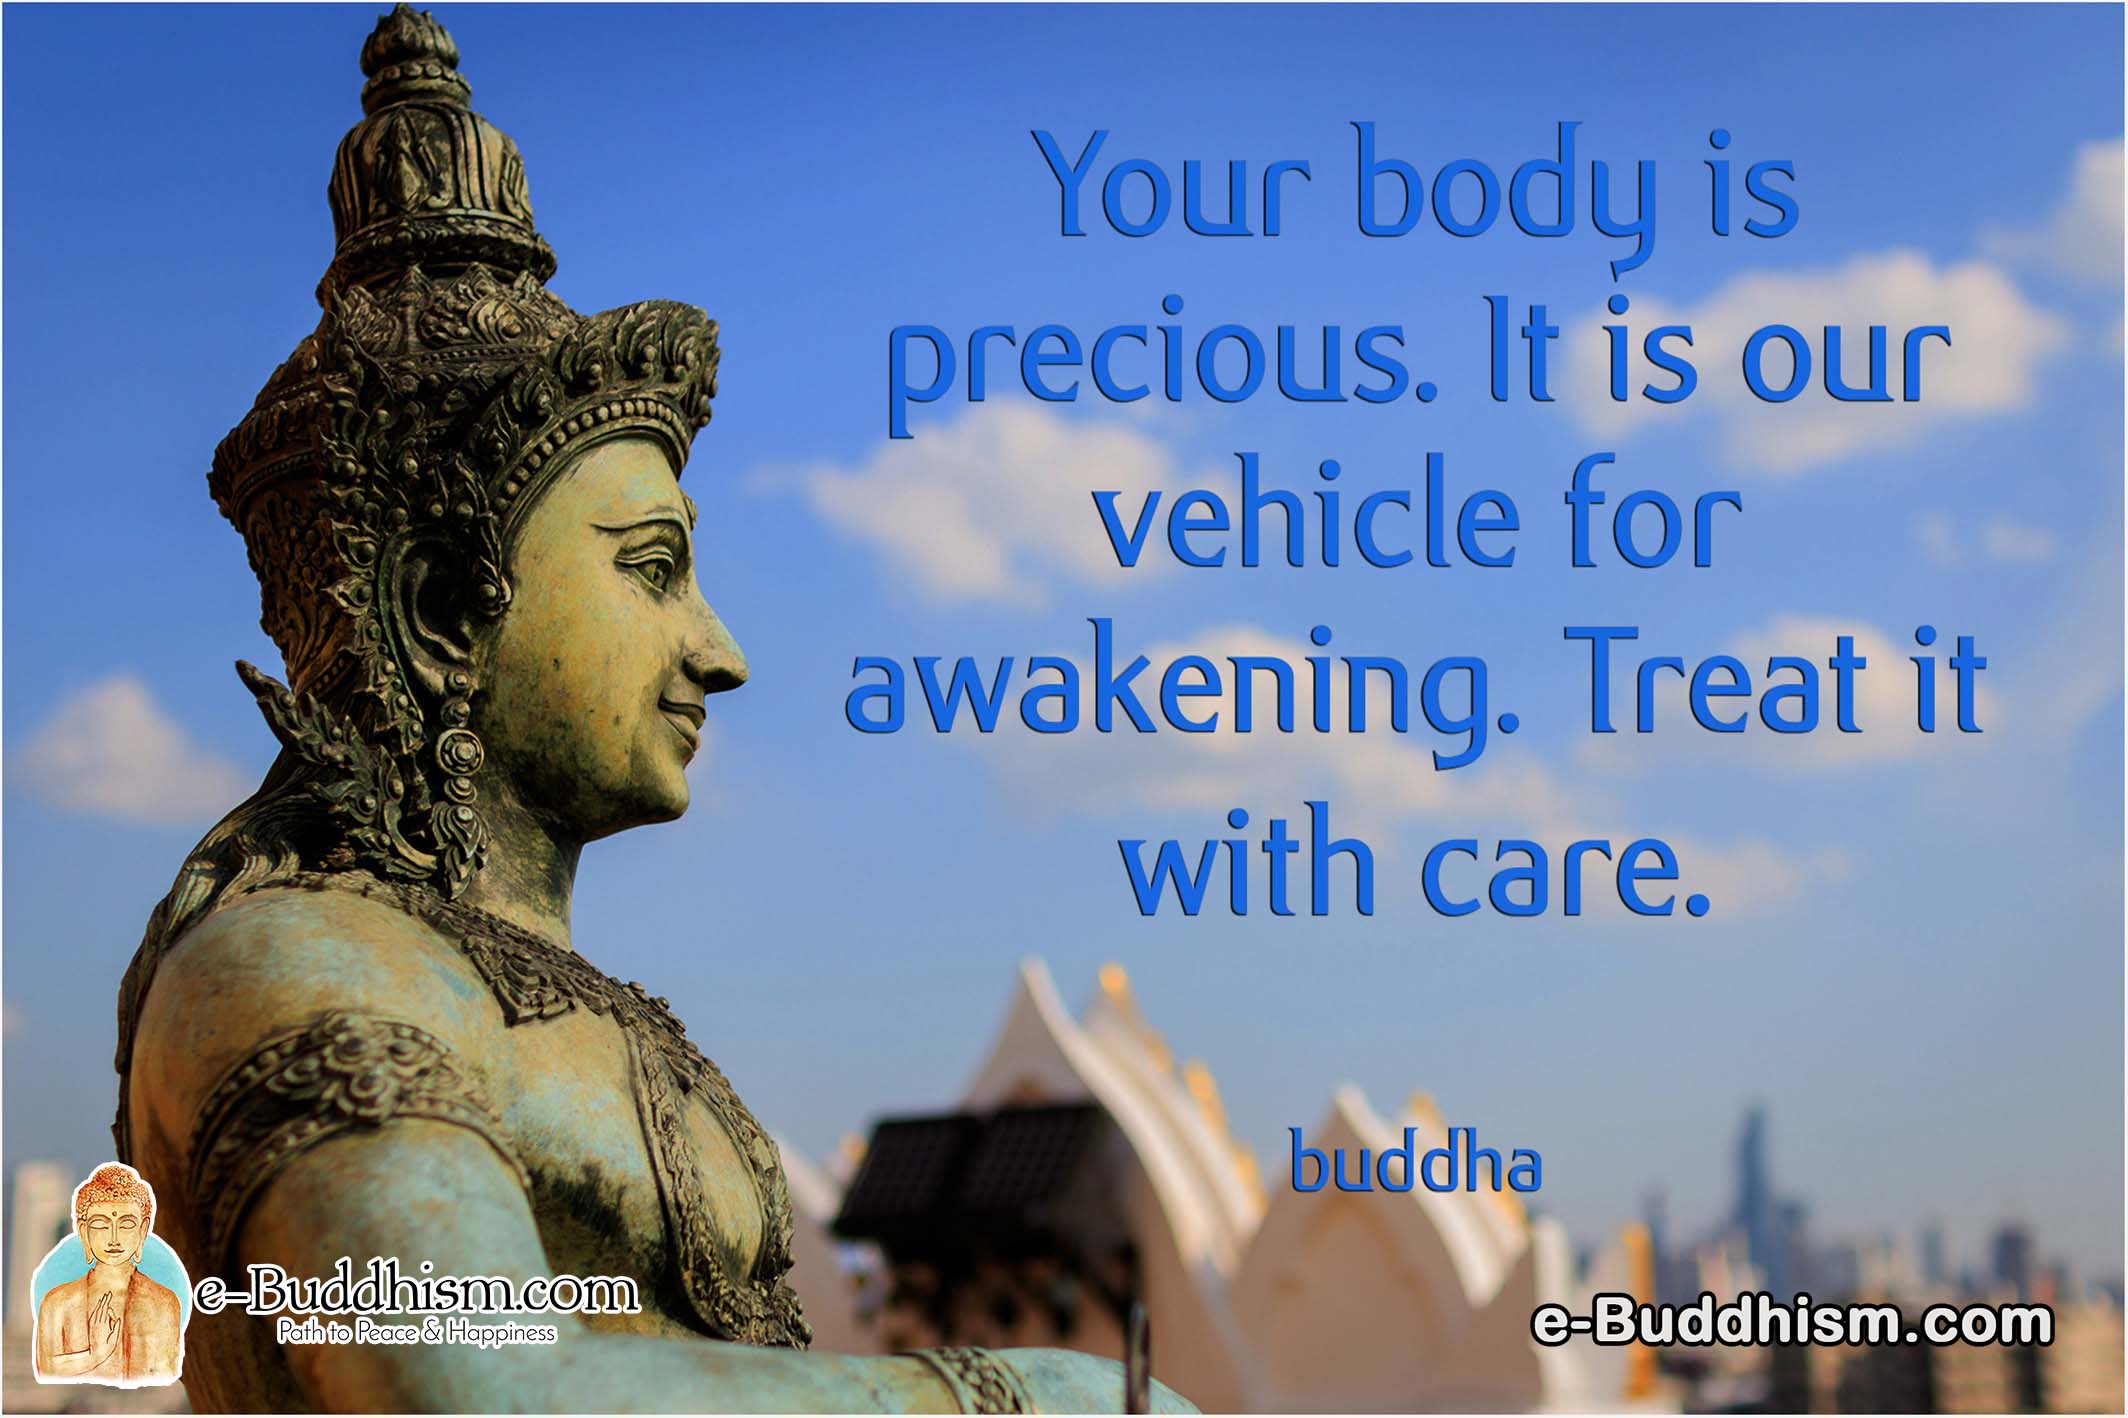 Your body is precious. It is our vehicle for awakening. Treat it with care. -Buddha